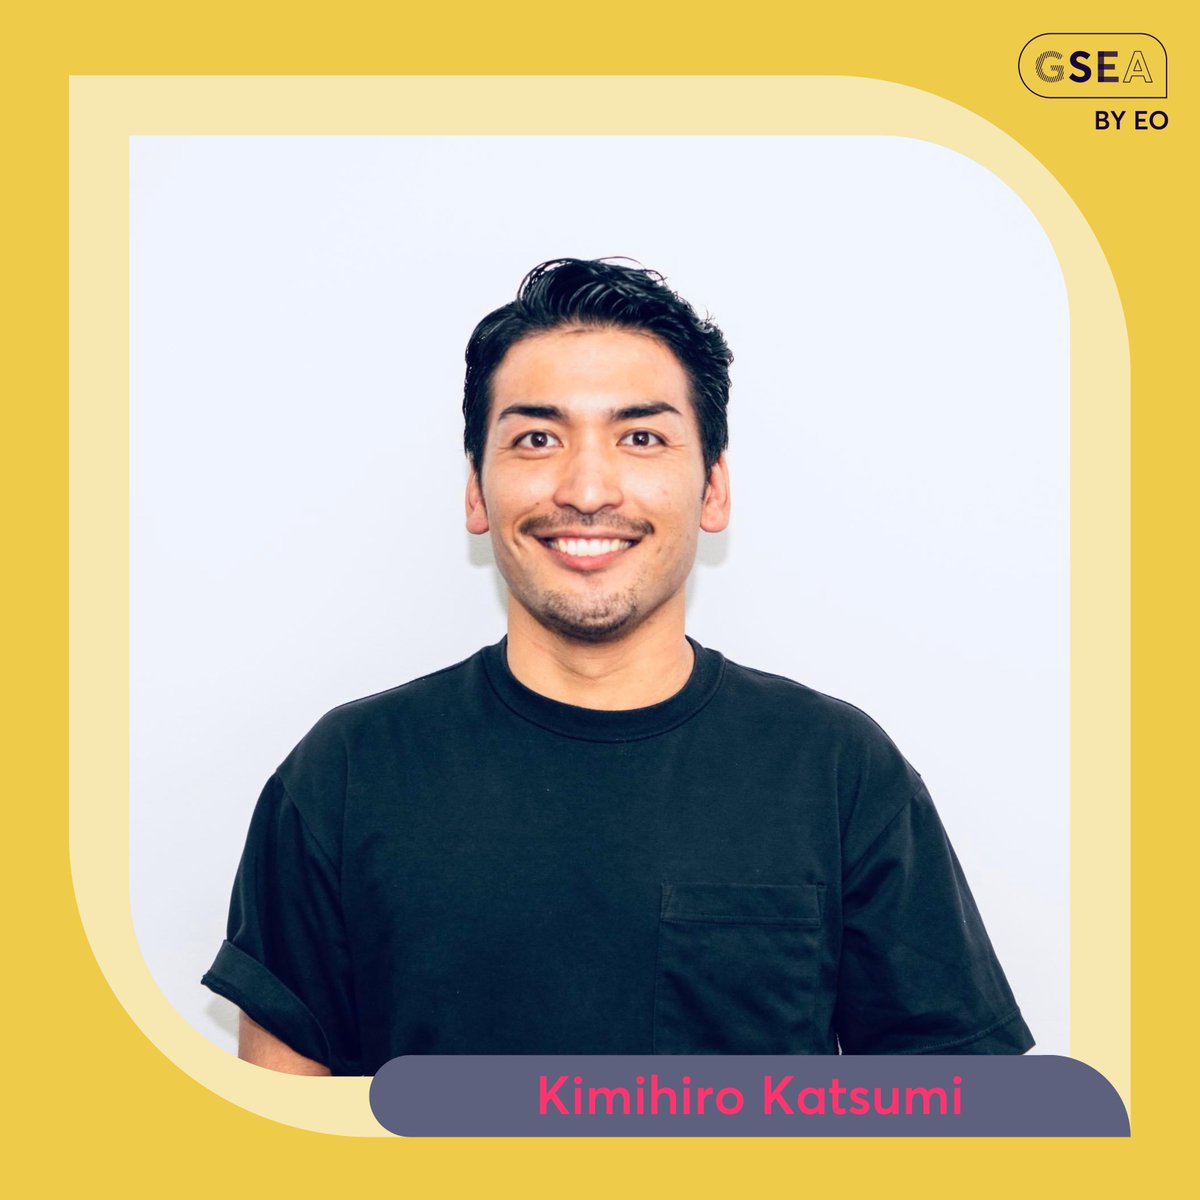 🌟 Last but not least student entrepreneur to compete at the GSEA North Asia & APAC Global Quarter Finals! Kimihiro Katsumi represents EO Tokyo Central with his venture @allesgood_jp. He is revolutionizing career development for GenZ! #EO #GSEA #CareerDevelopment #Innovation